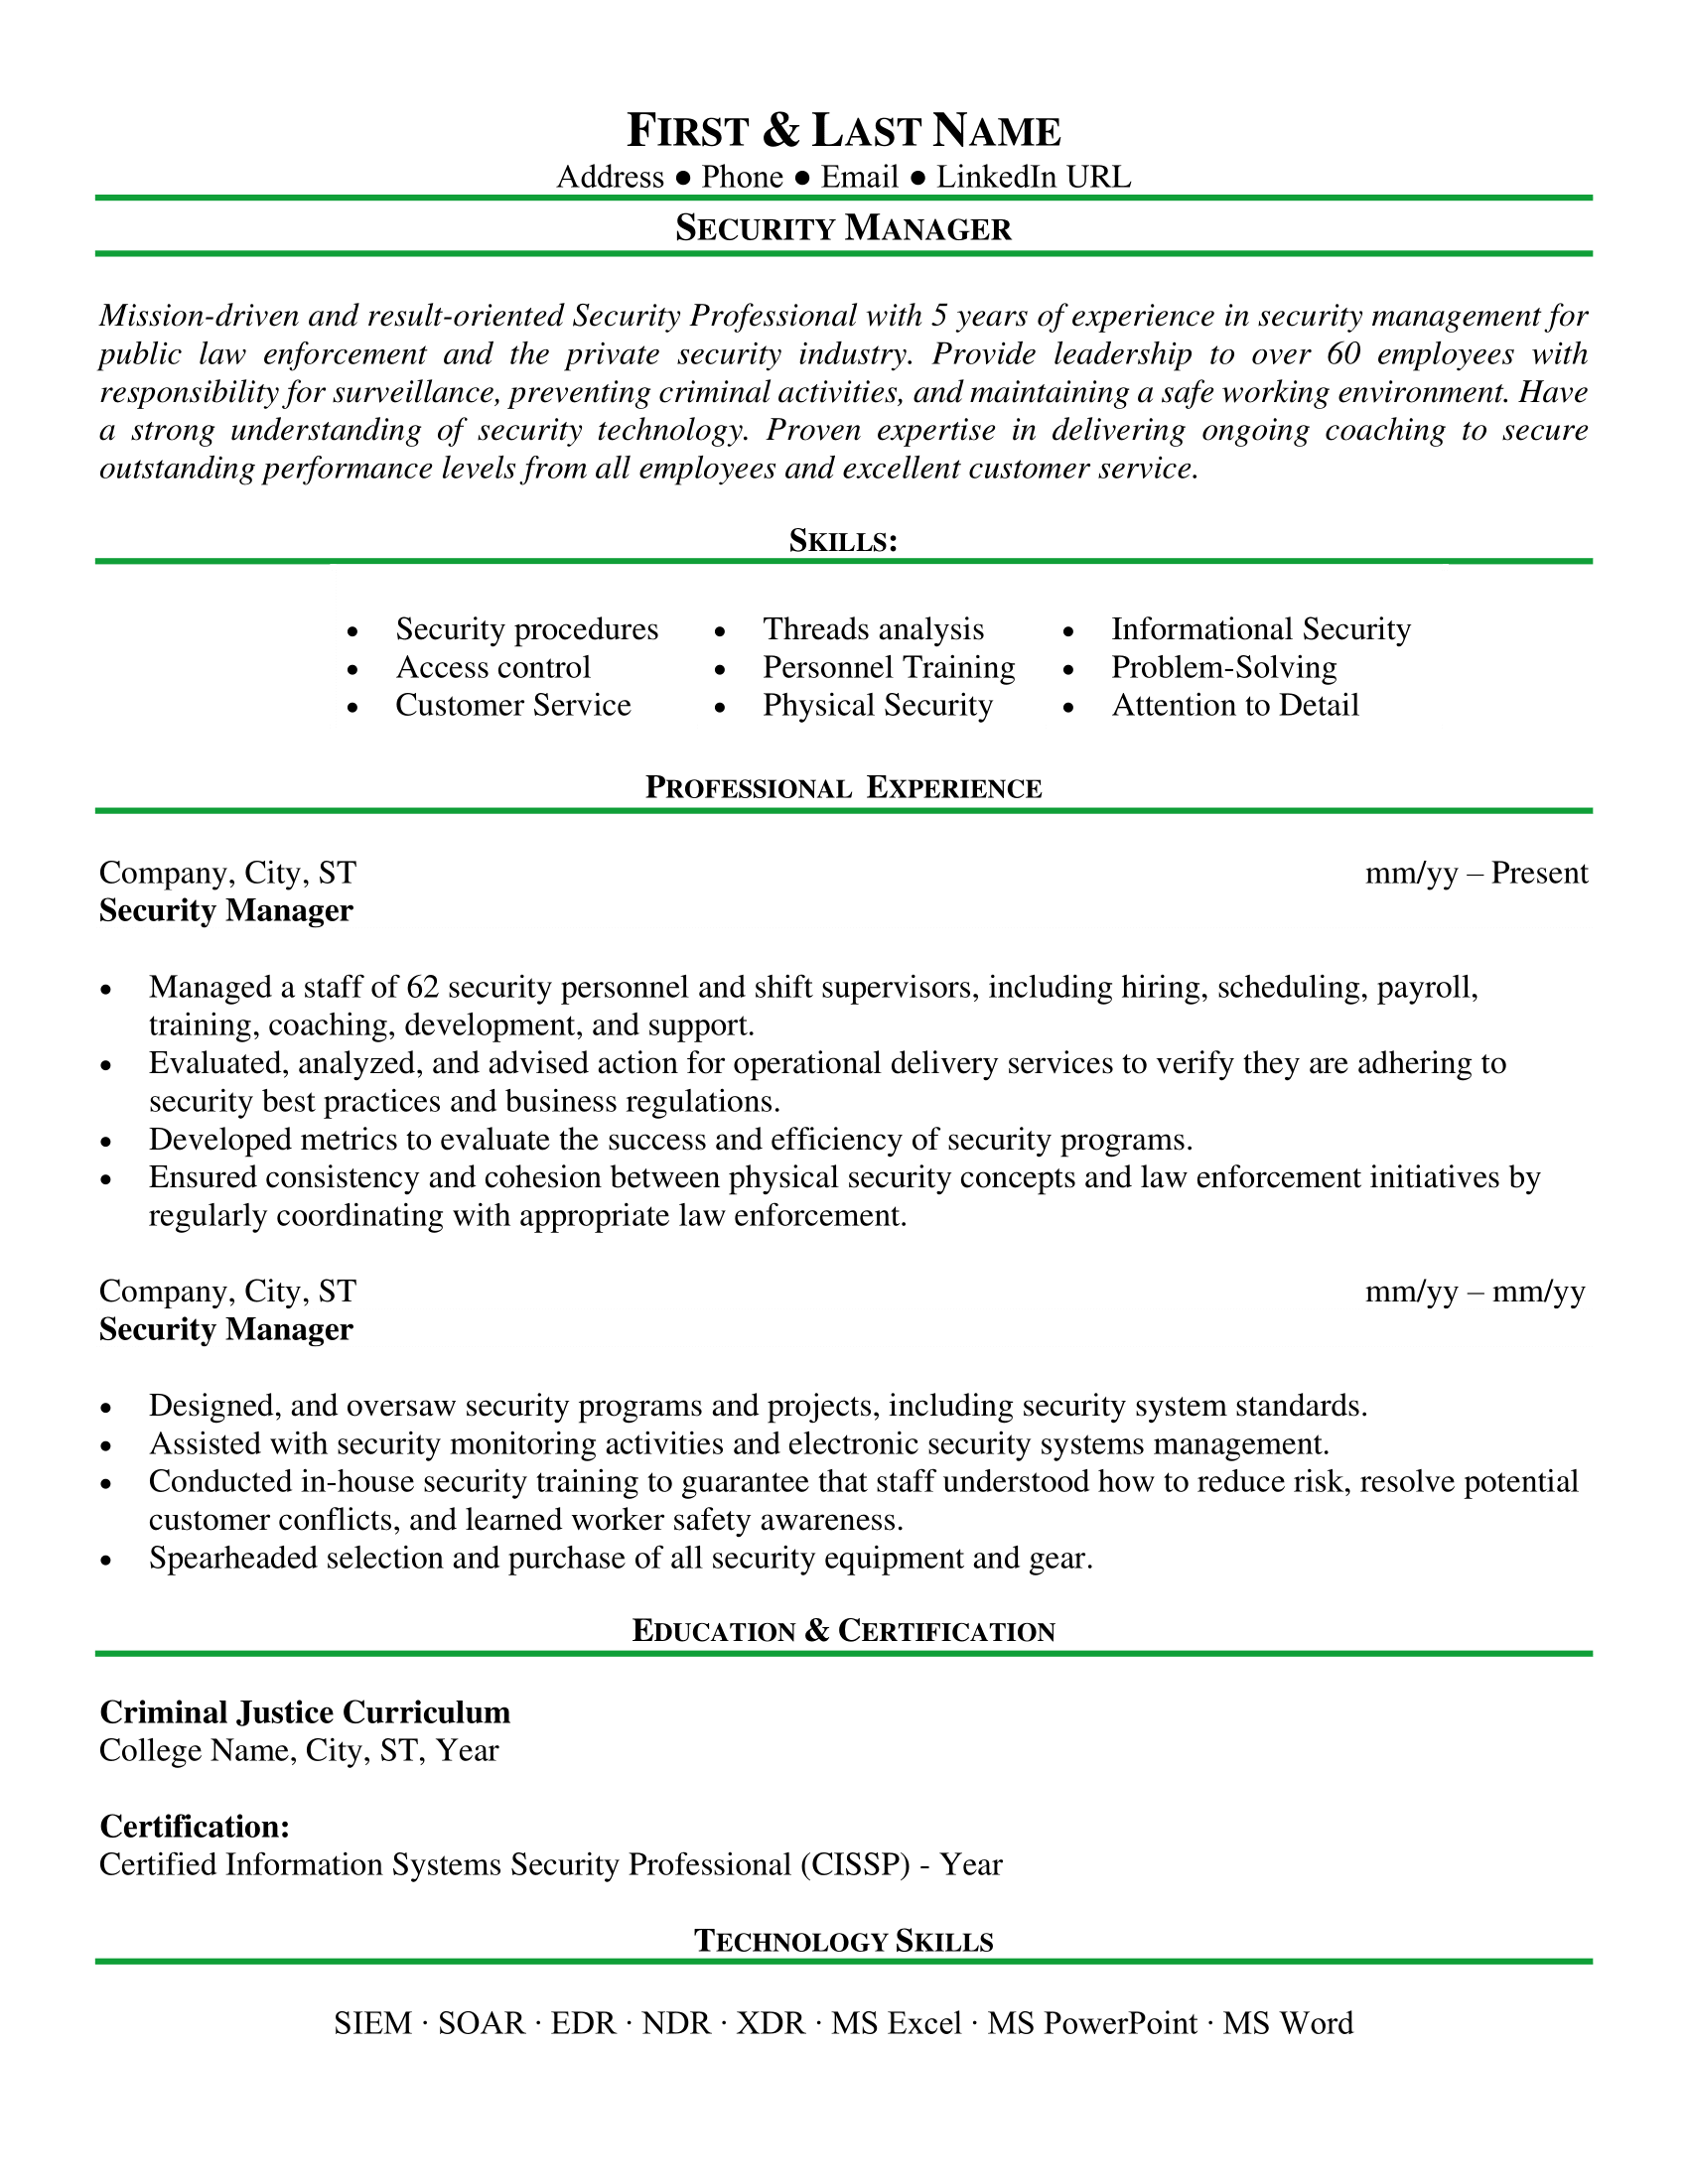 Security Manager Resume Sample